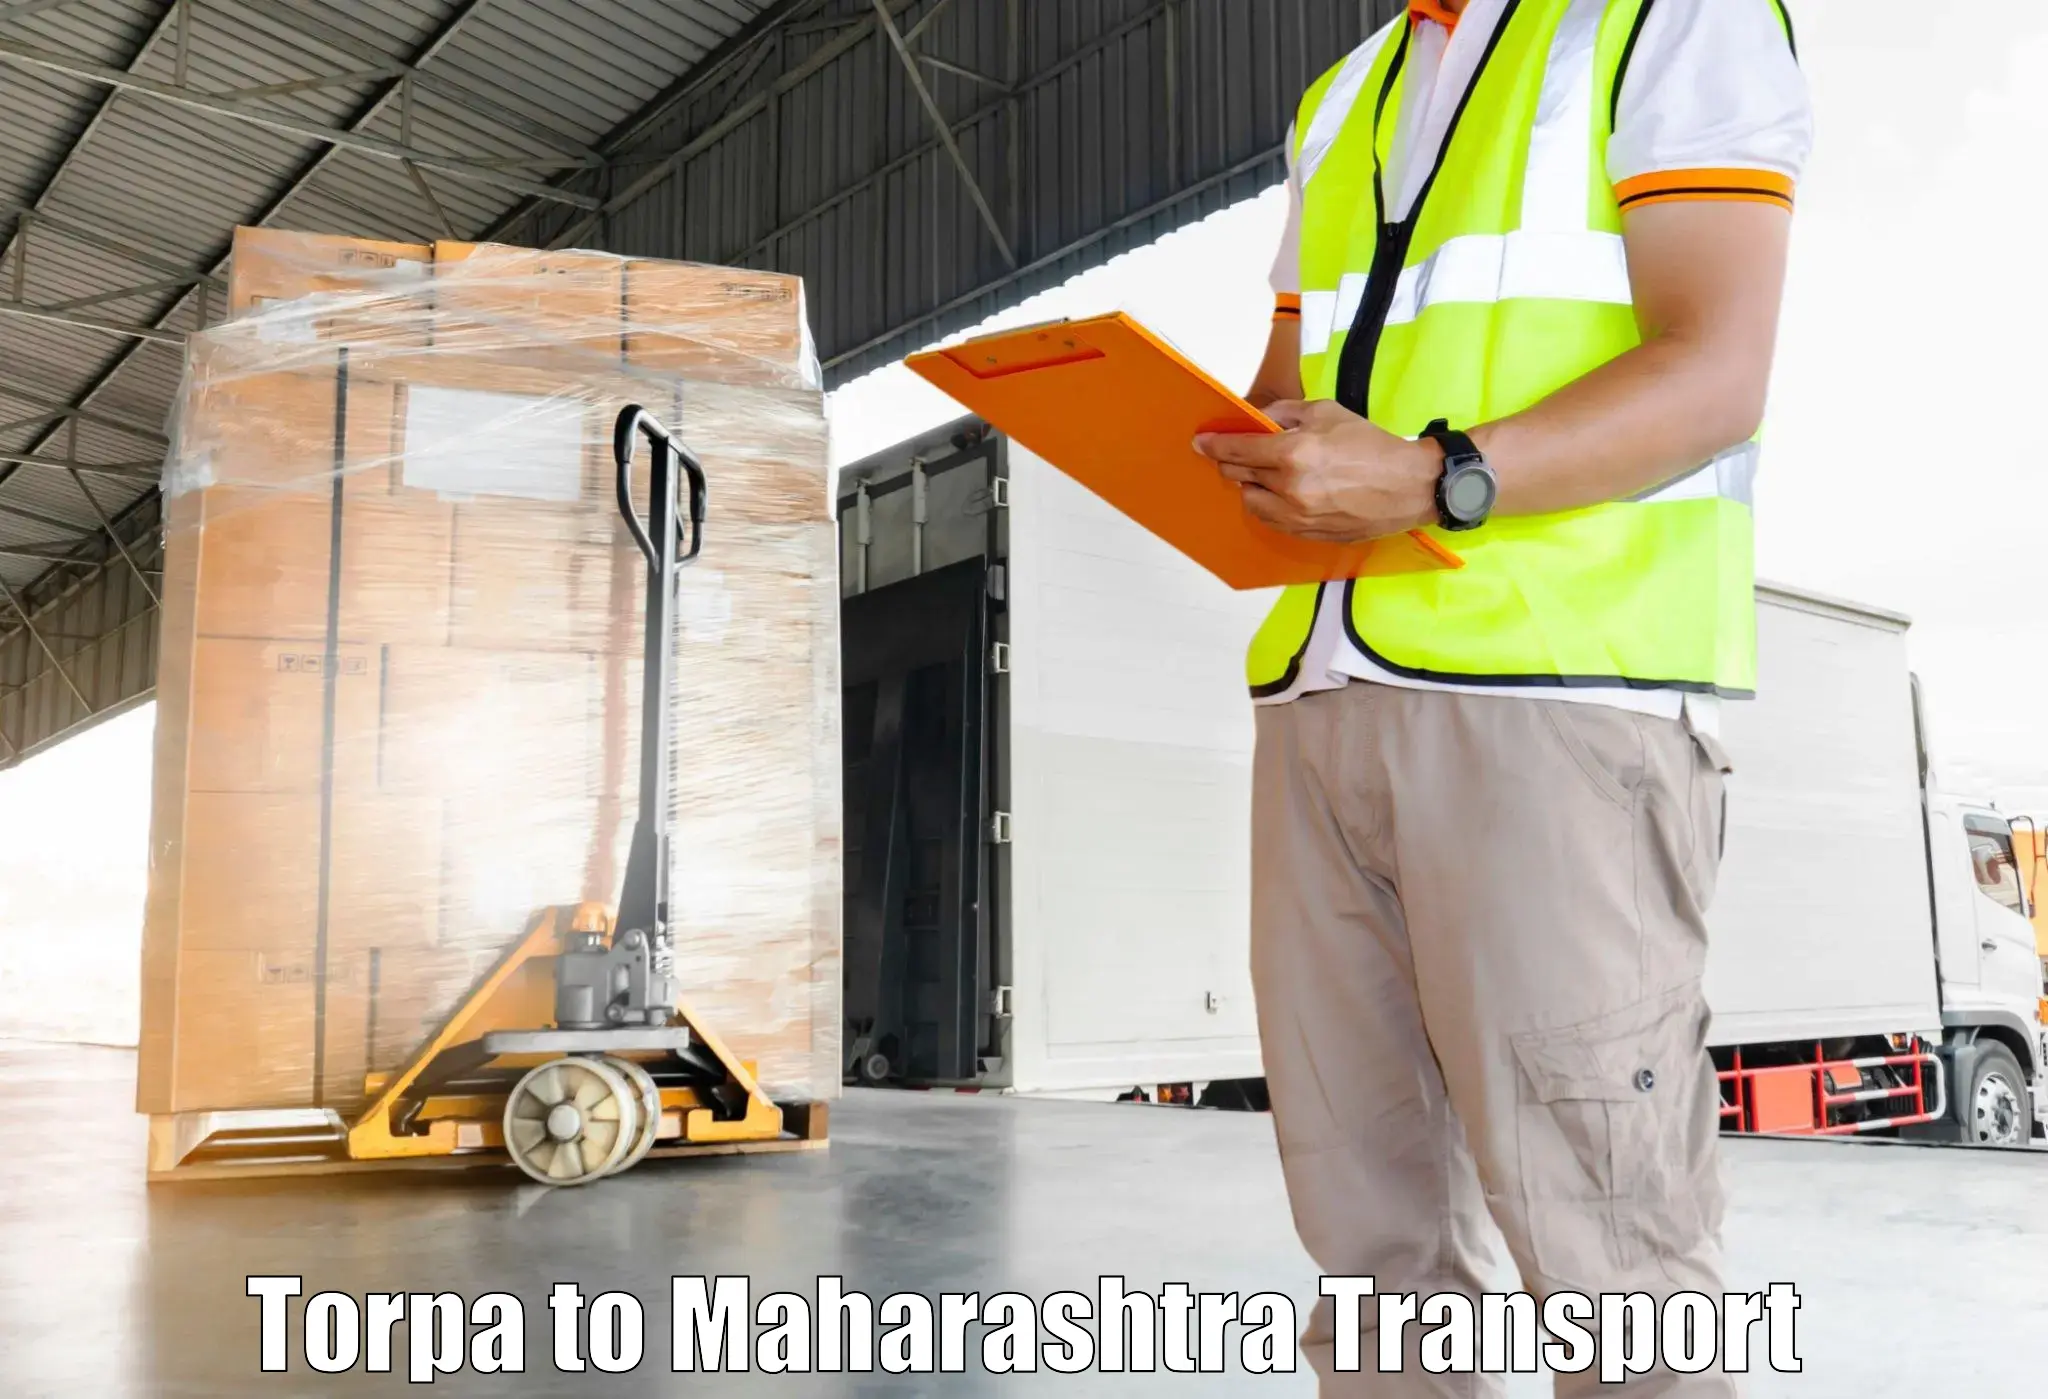 Container transport service Torpa to Maharashtra